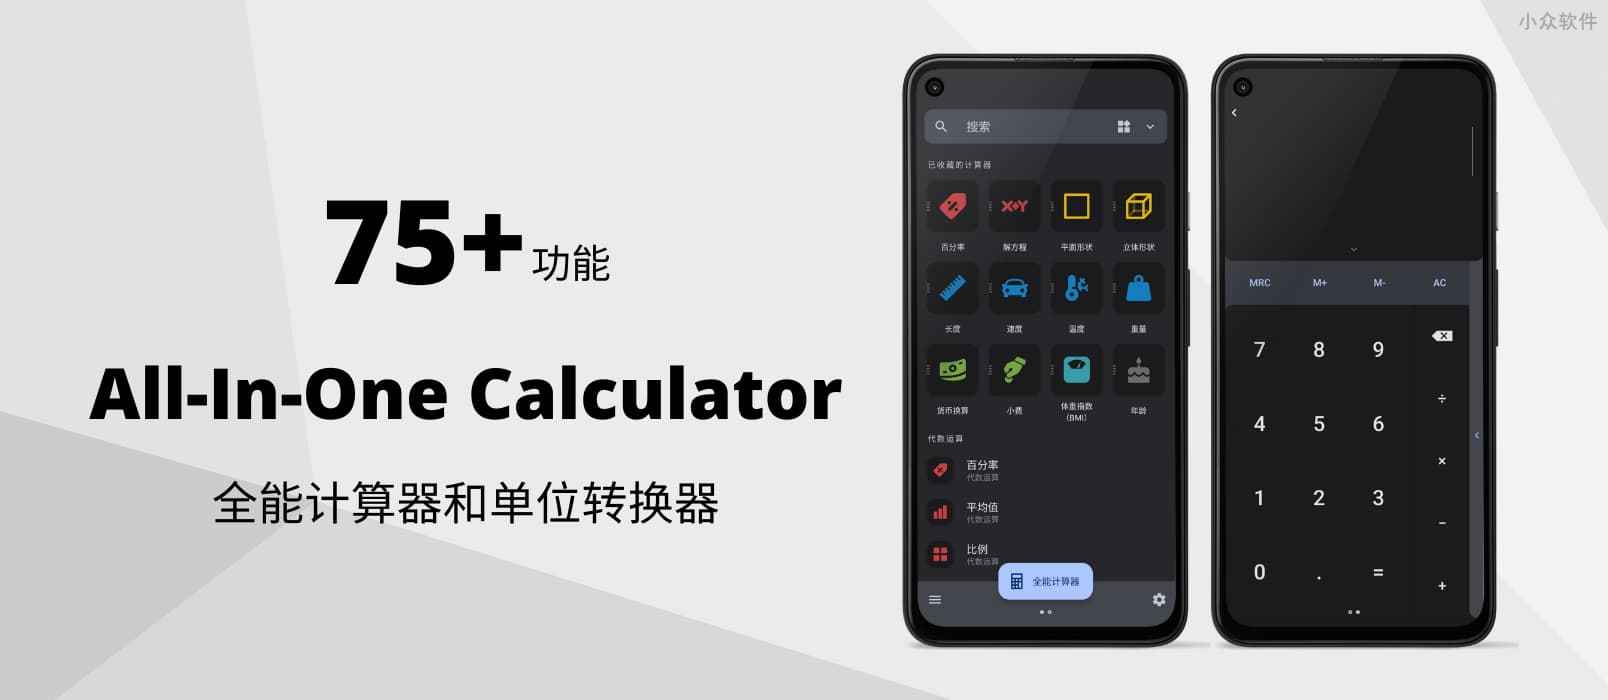 All-In-One Calculator – 75+ 功能，全能计算器和单位转换器[Android]